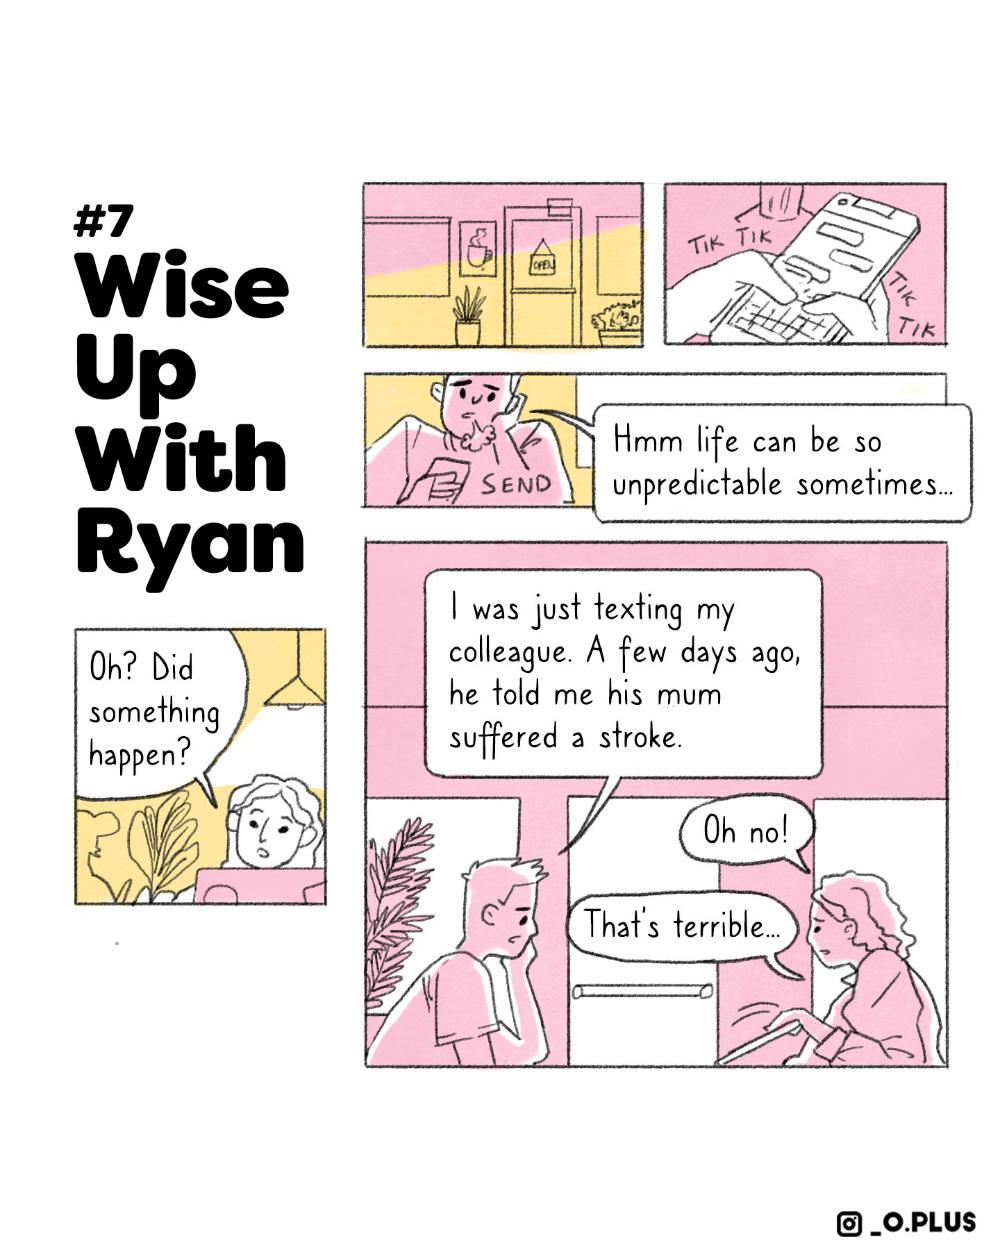 Wise up with Ryan - Episode 7 - Comic 1